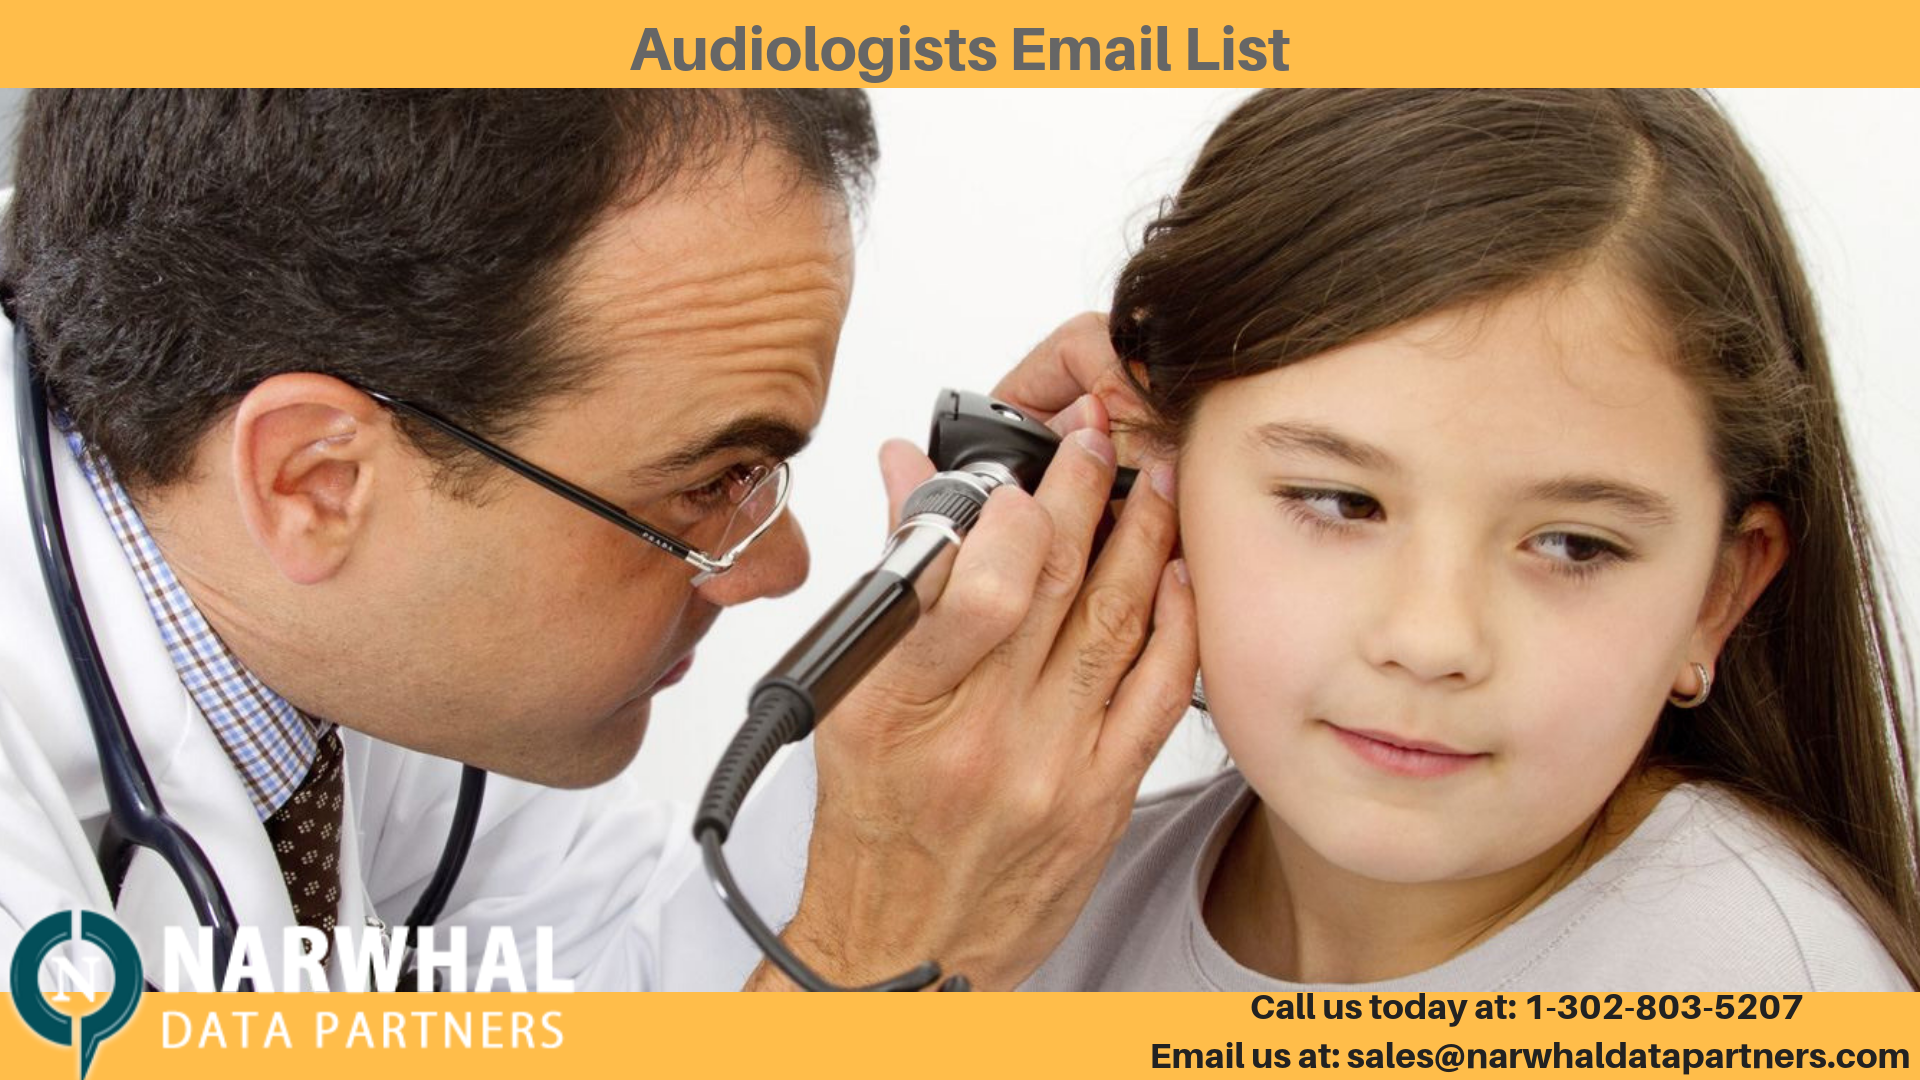 http://narwhaldatapartners.com/audiologists-email-list.html